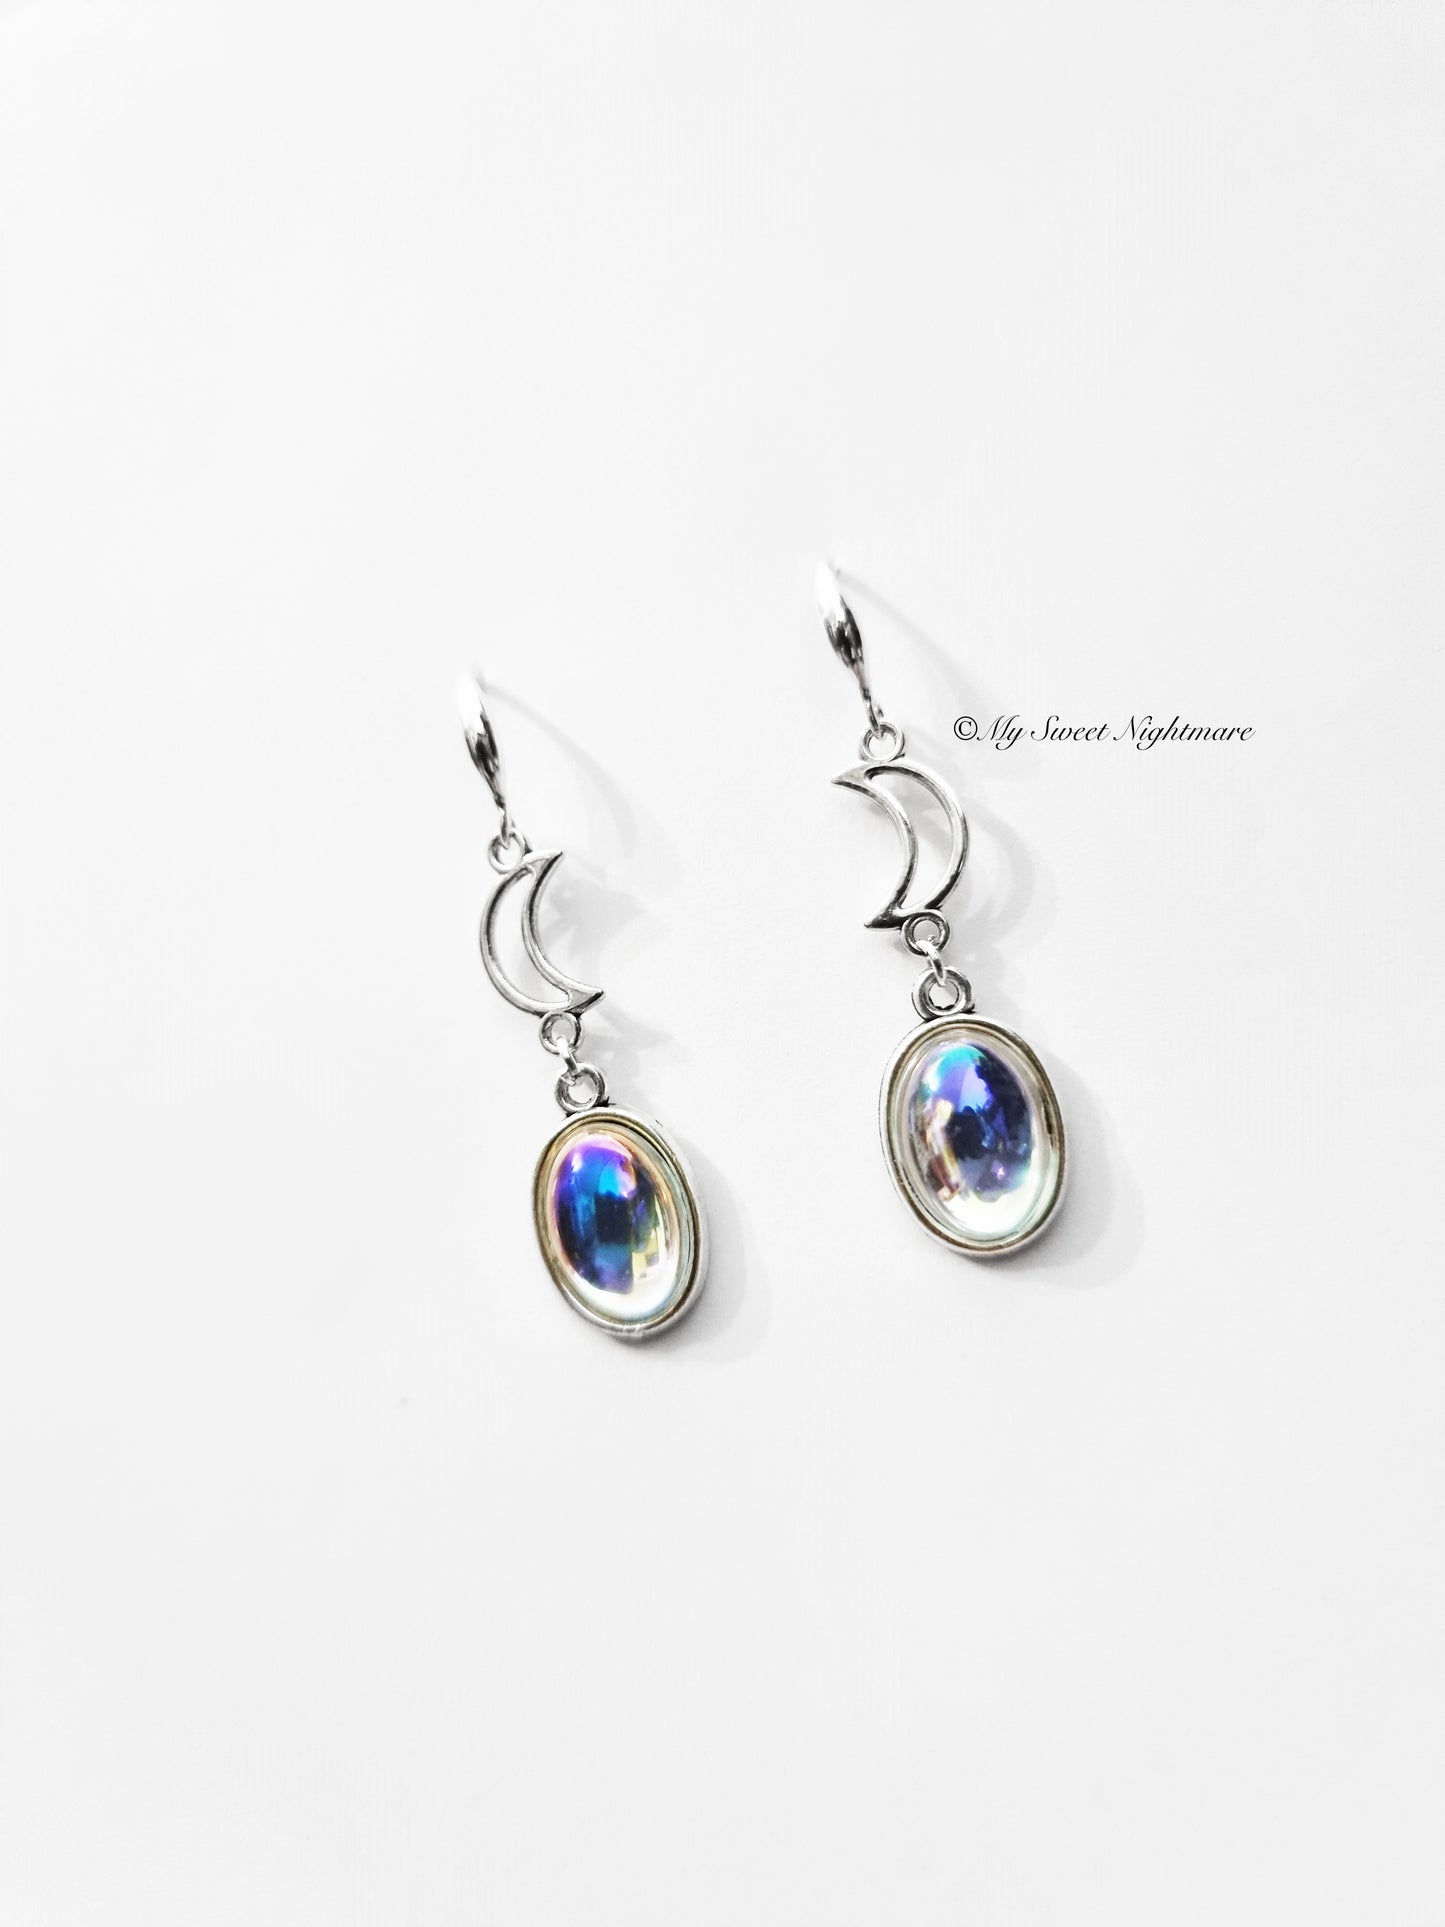 Earrings with hanging moons 